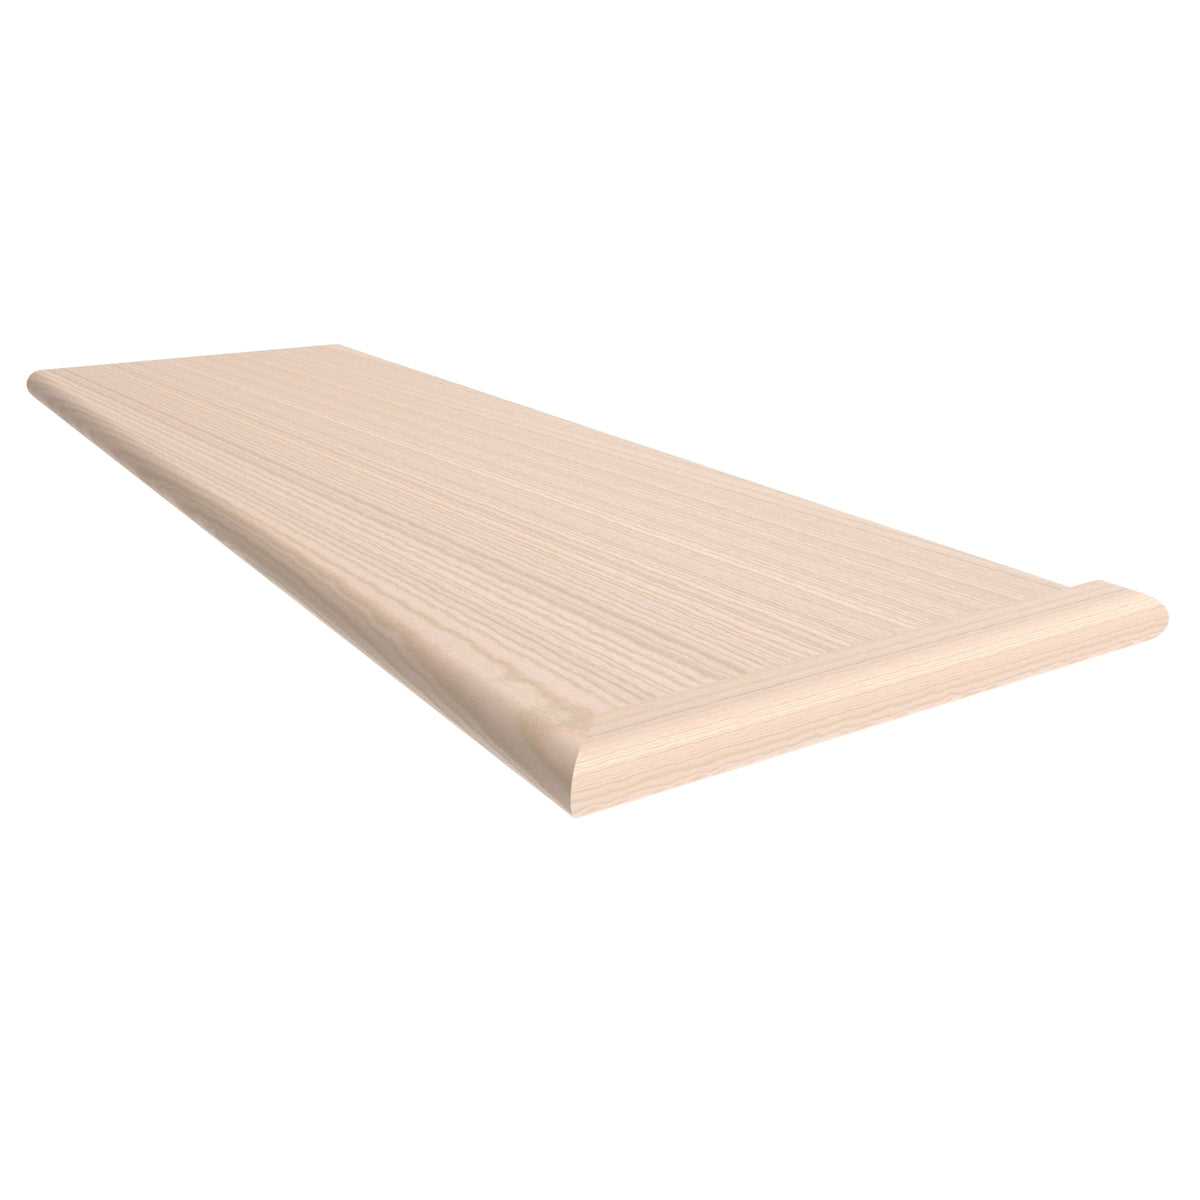 Jamaddar Timber Traders Wood supplier - A door is a hinged or otherwise  movable barrier that allows ingress into and egress from an enclosure. The  created opening in the wall is a